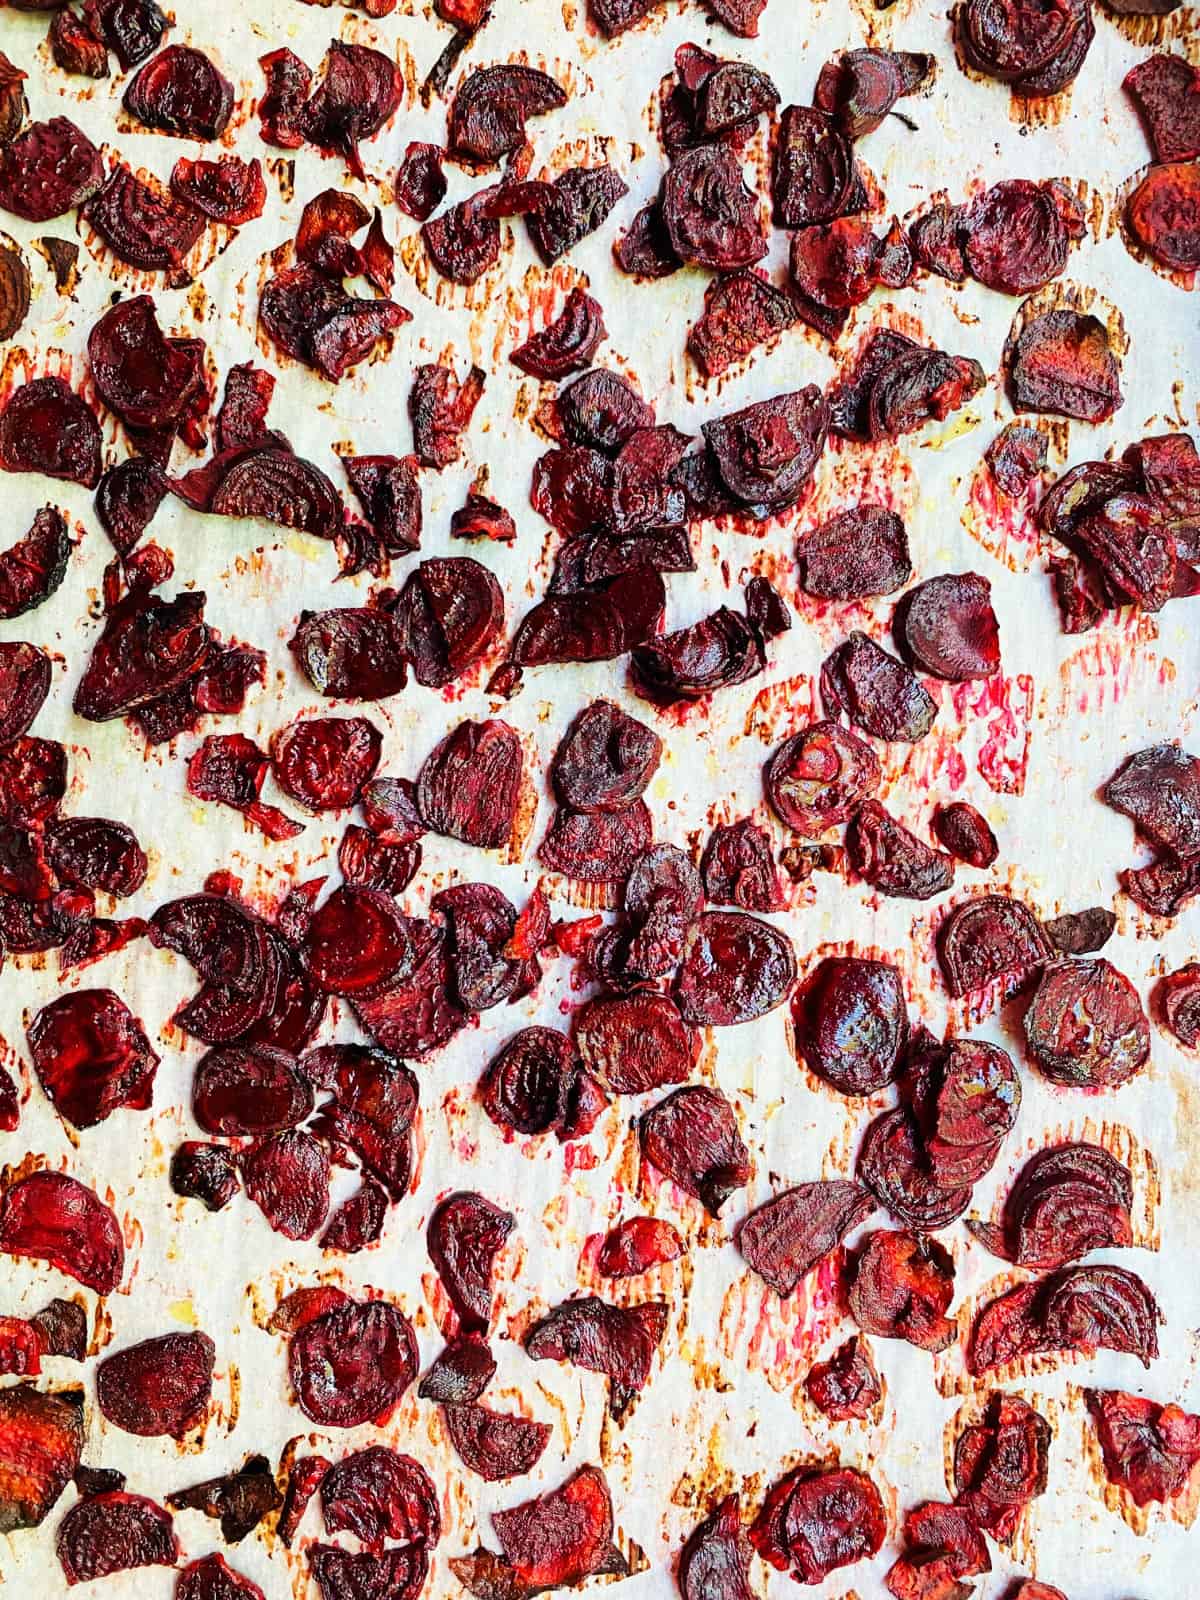 roasted raw beets on a baling sheet